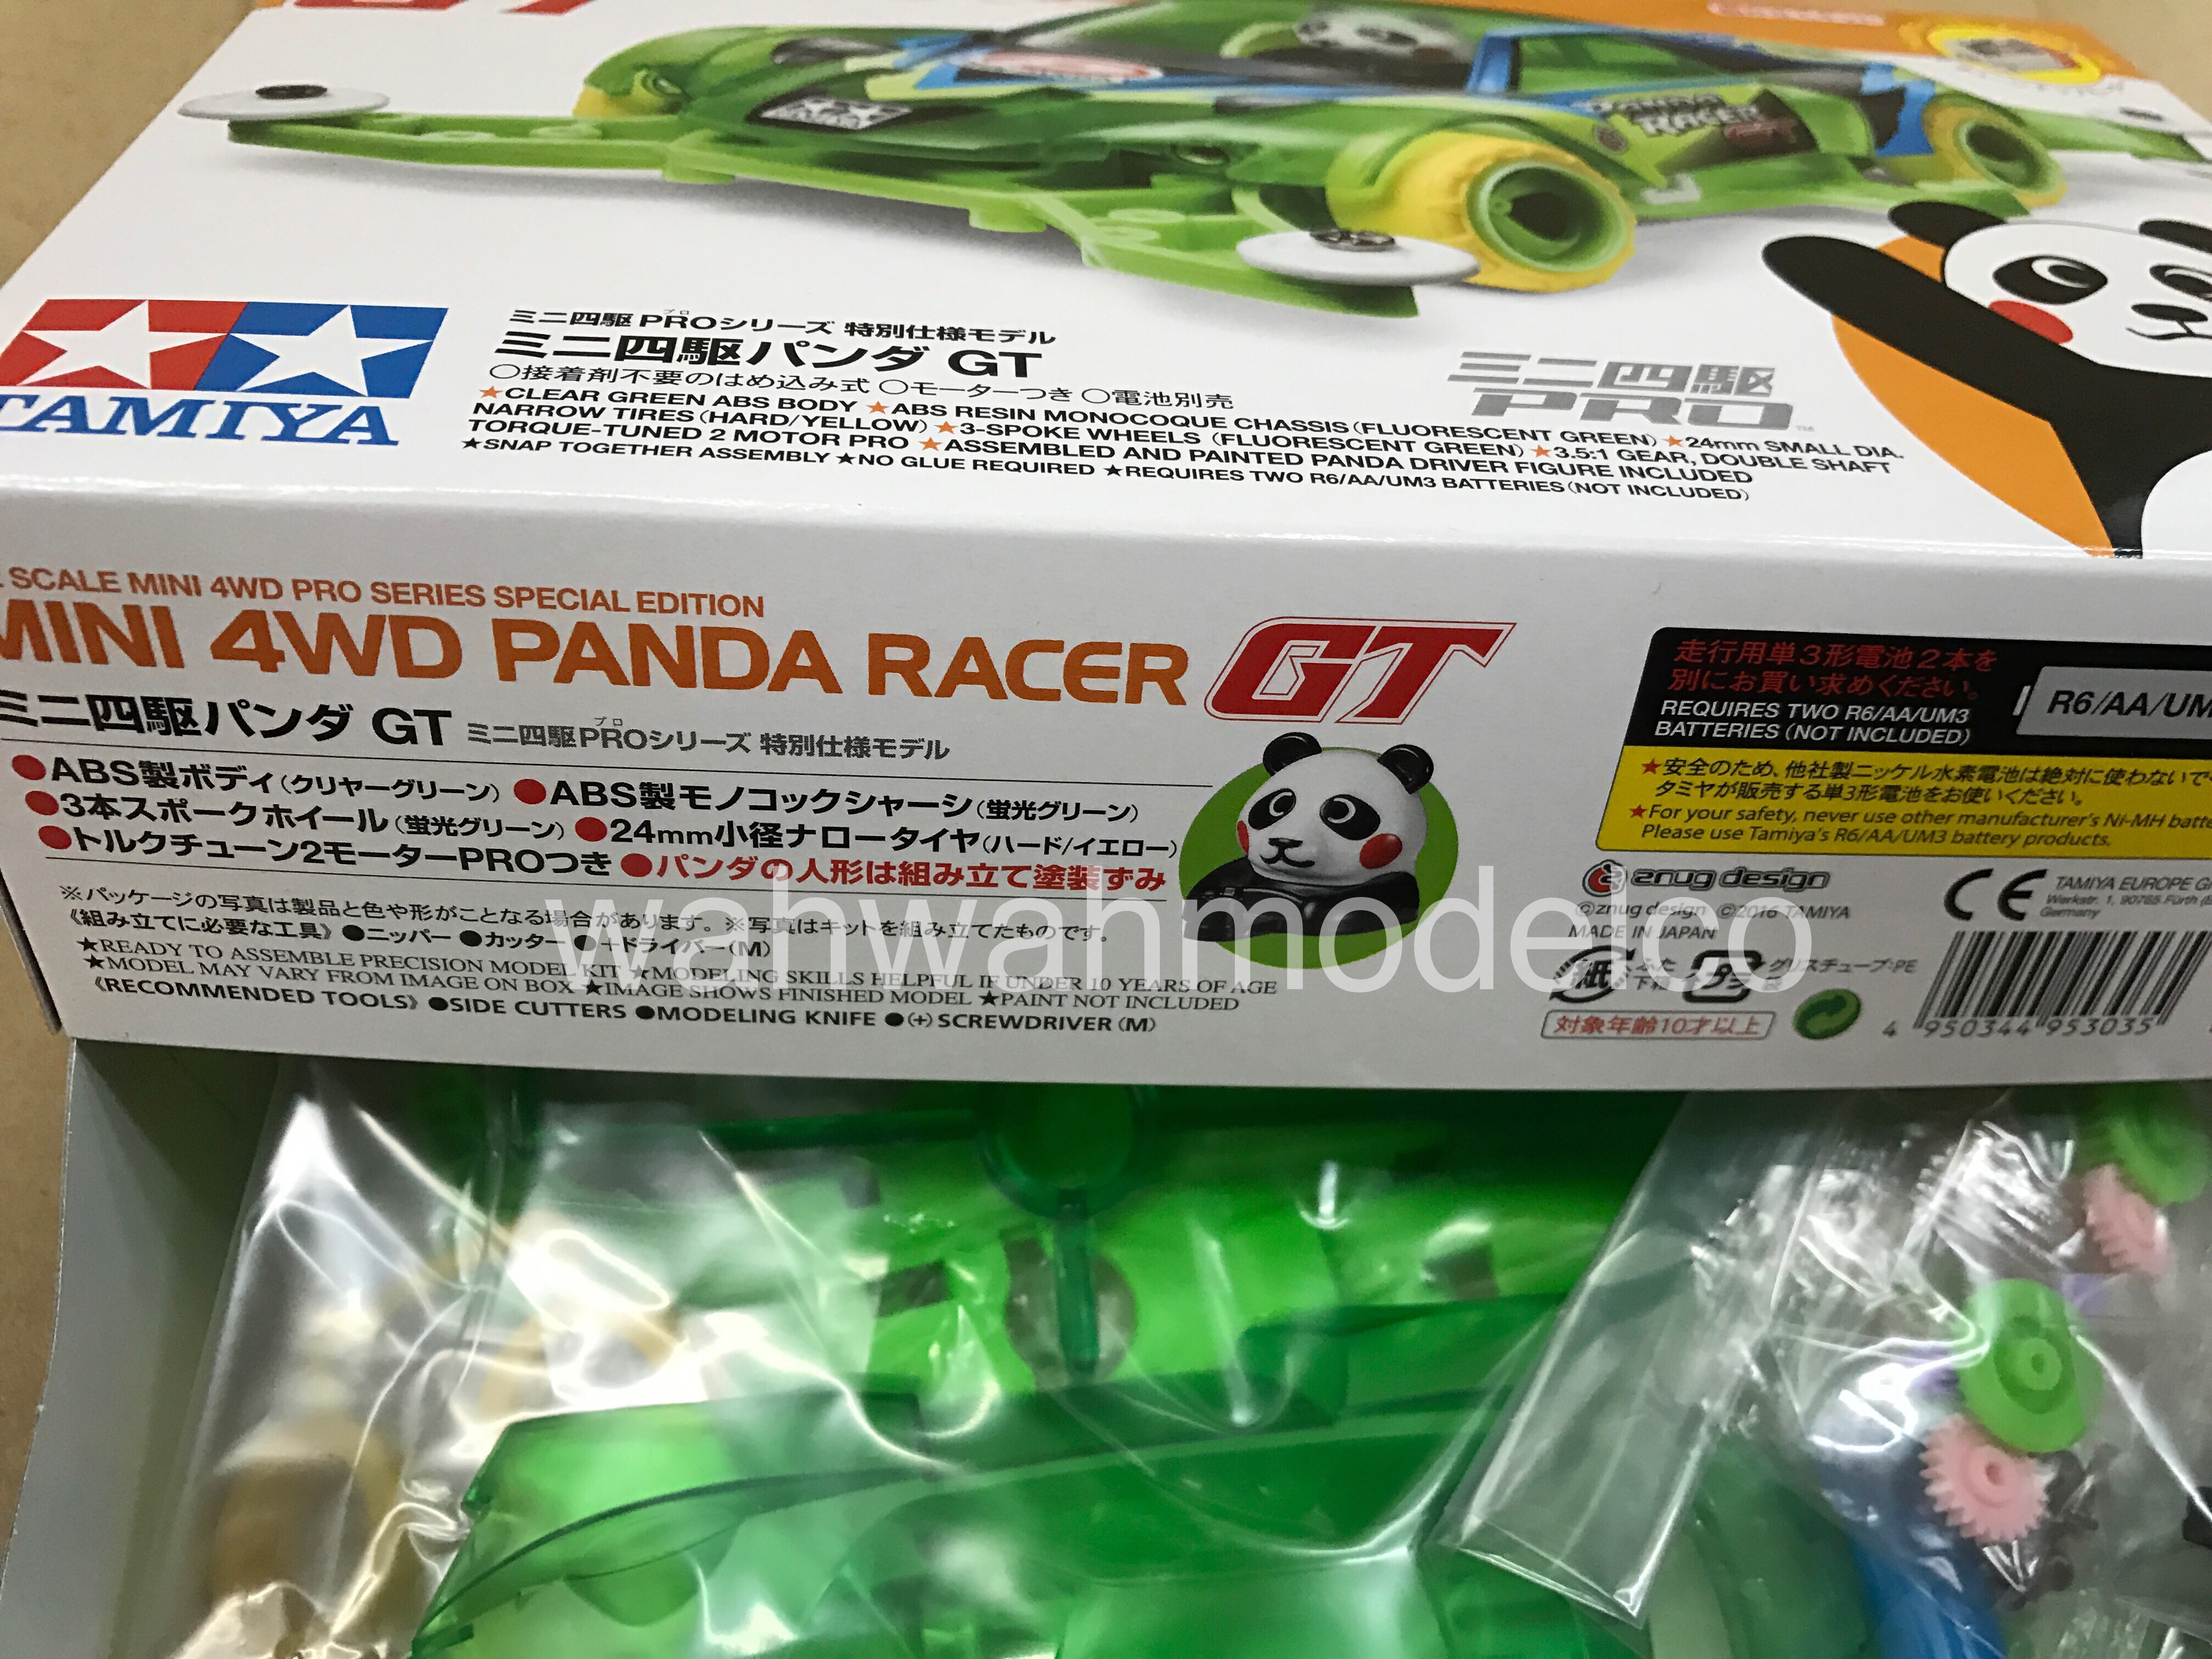 Tamiya Mini 4wd Panda Racer GT 95303 MA Chassis Plastic Model 1a3221 for sale online